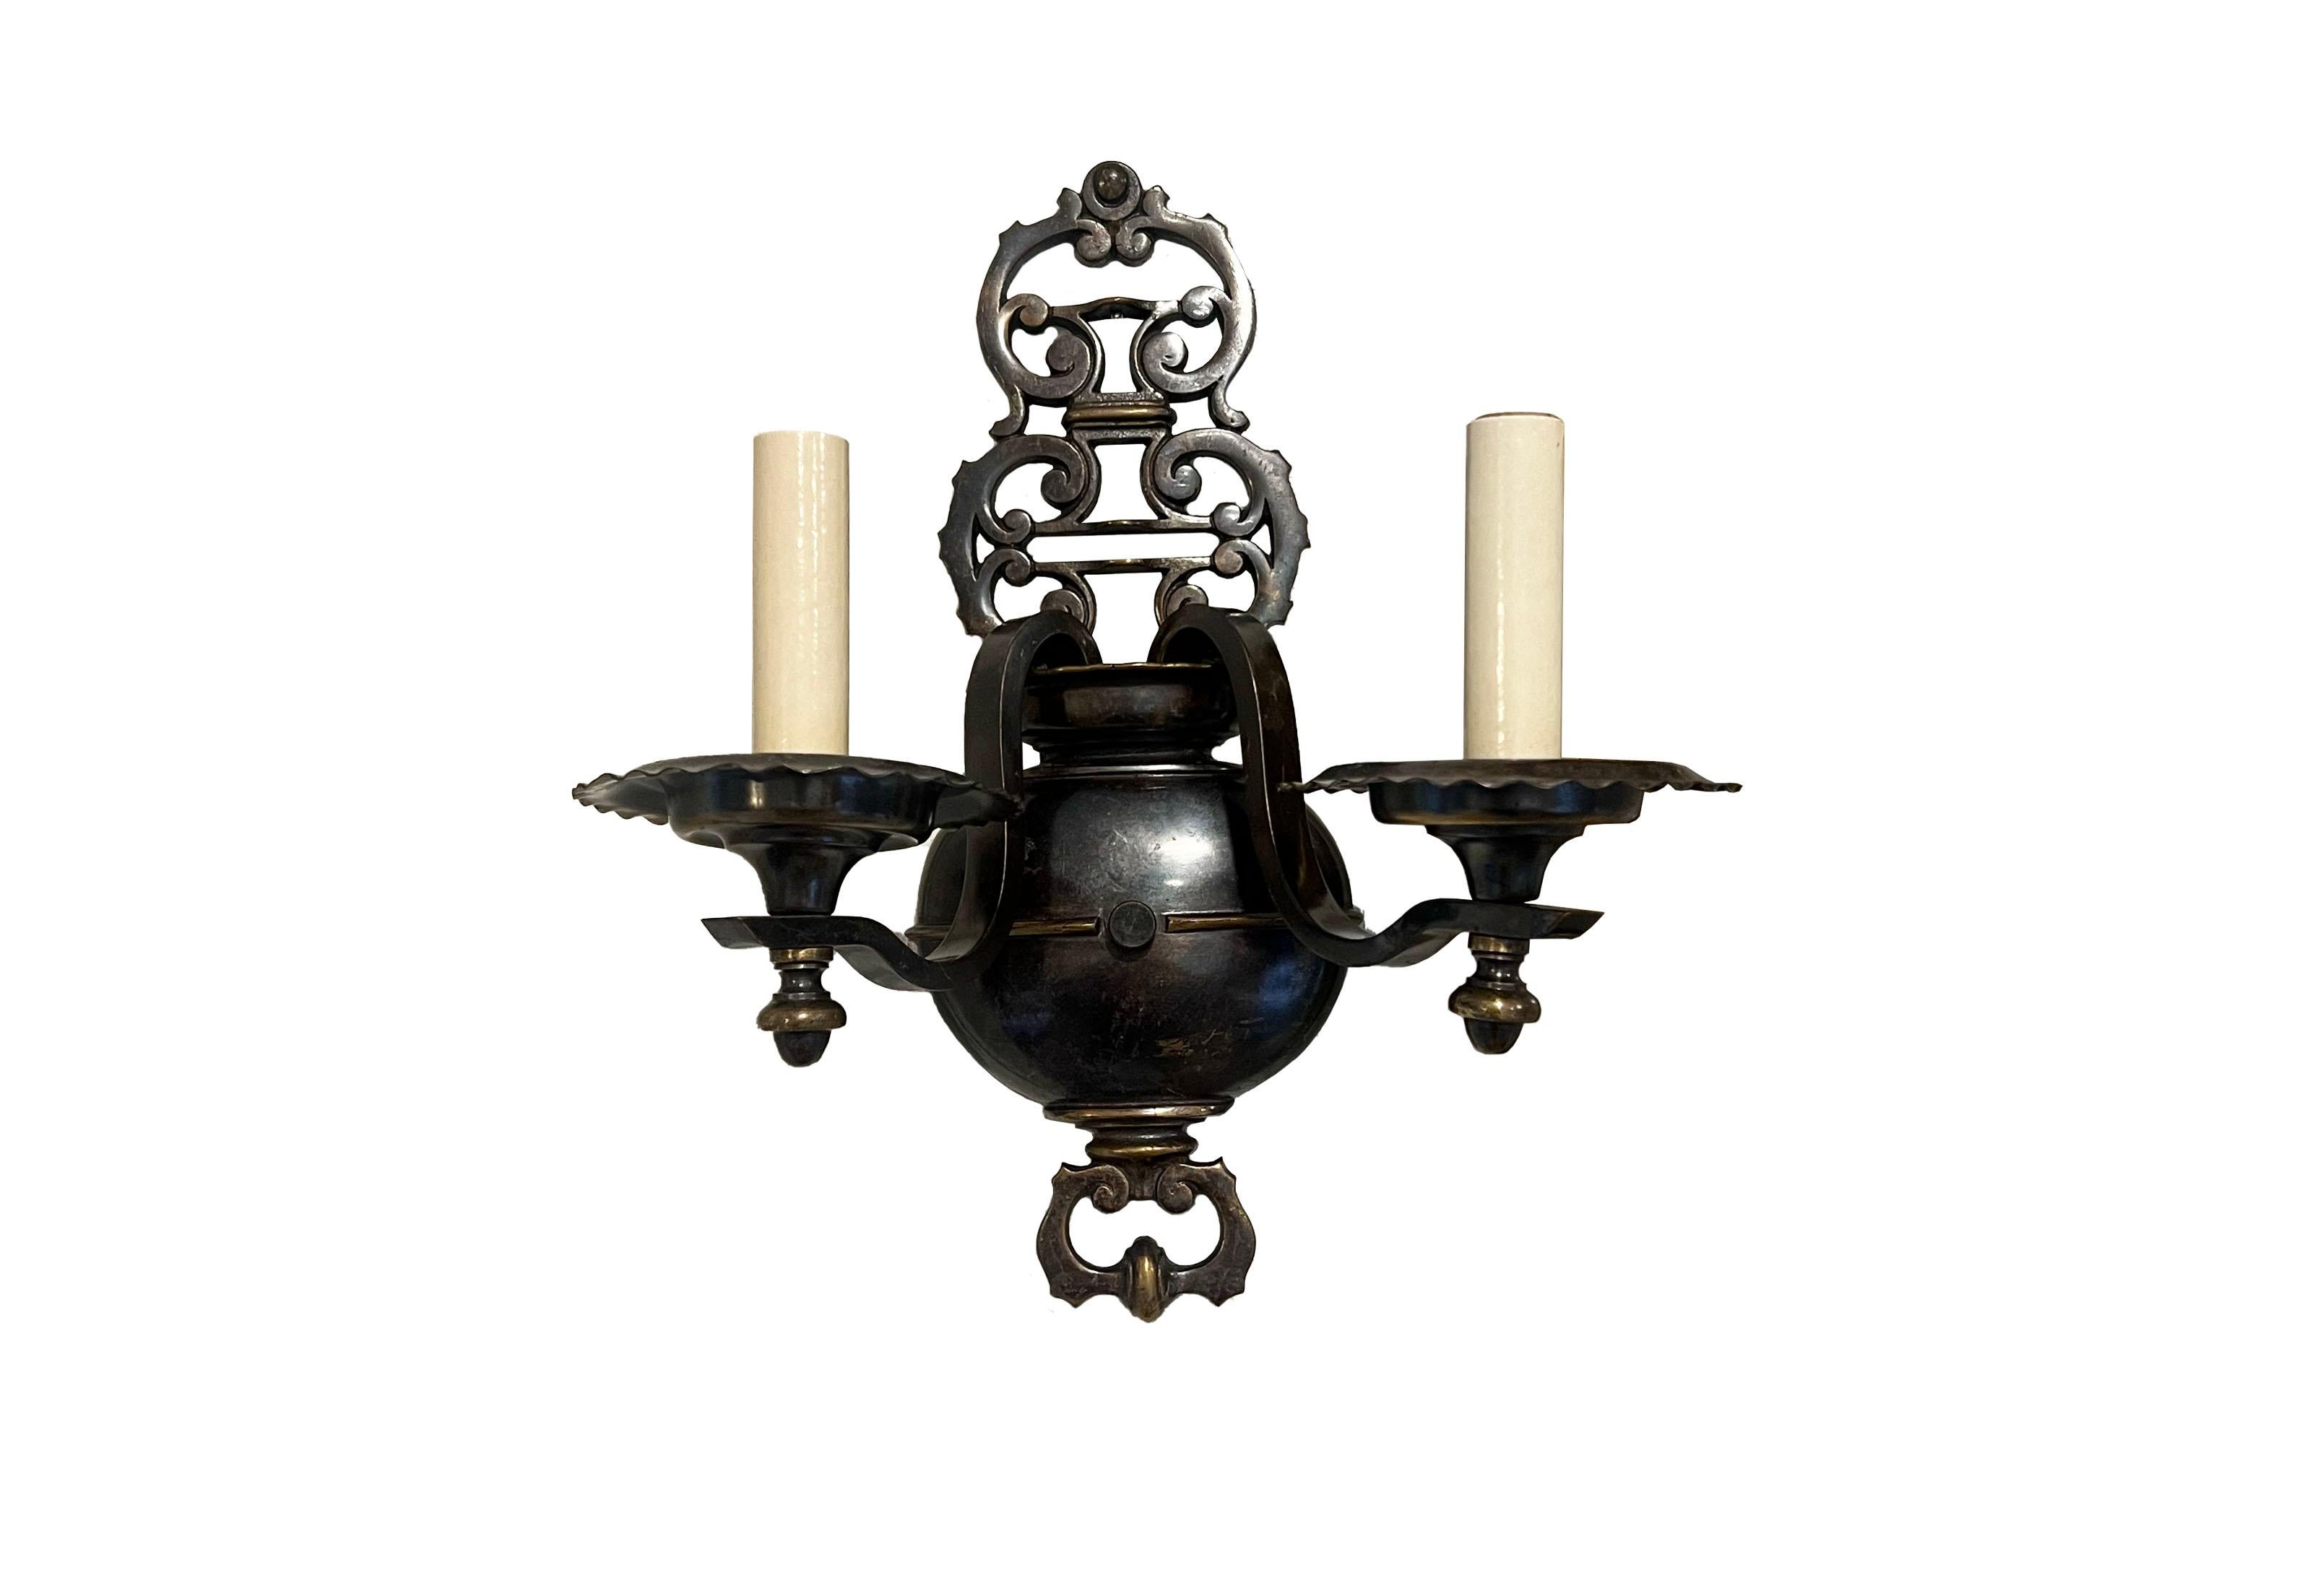 A pair of two-light sconces. Crafted with exquisite attention to detail, these sconces feature a patinated bronze metal finish that exudes a warm, inviting glow, perfect for creating a cozy ambiance in any room. The design is a nod to the